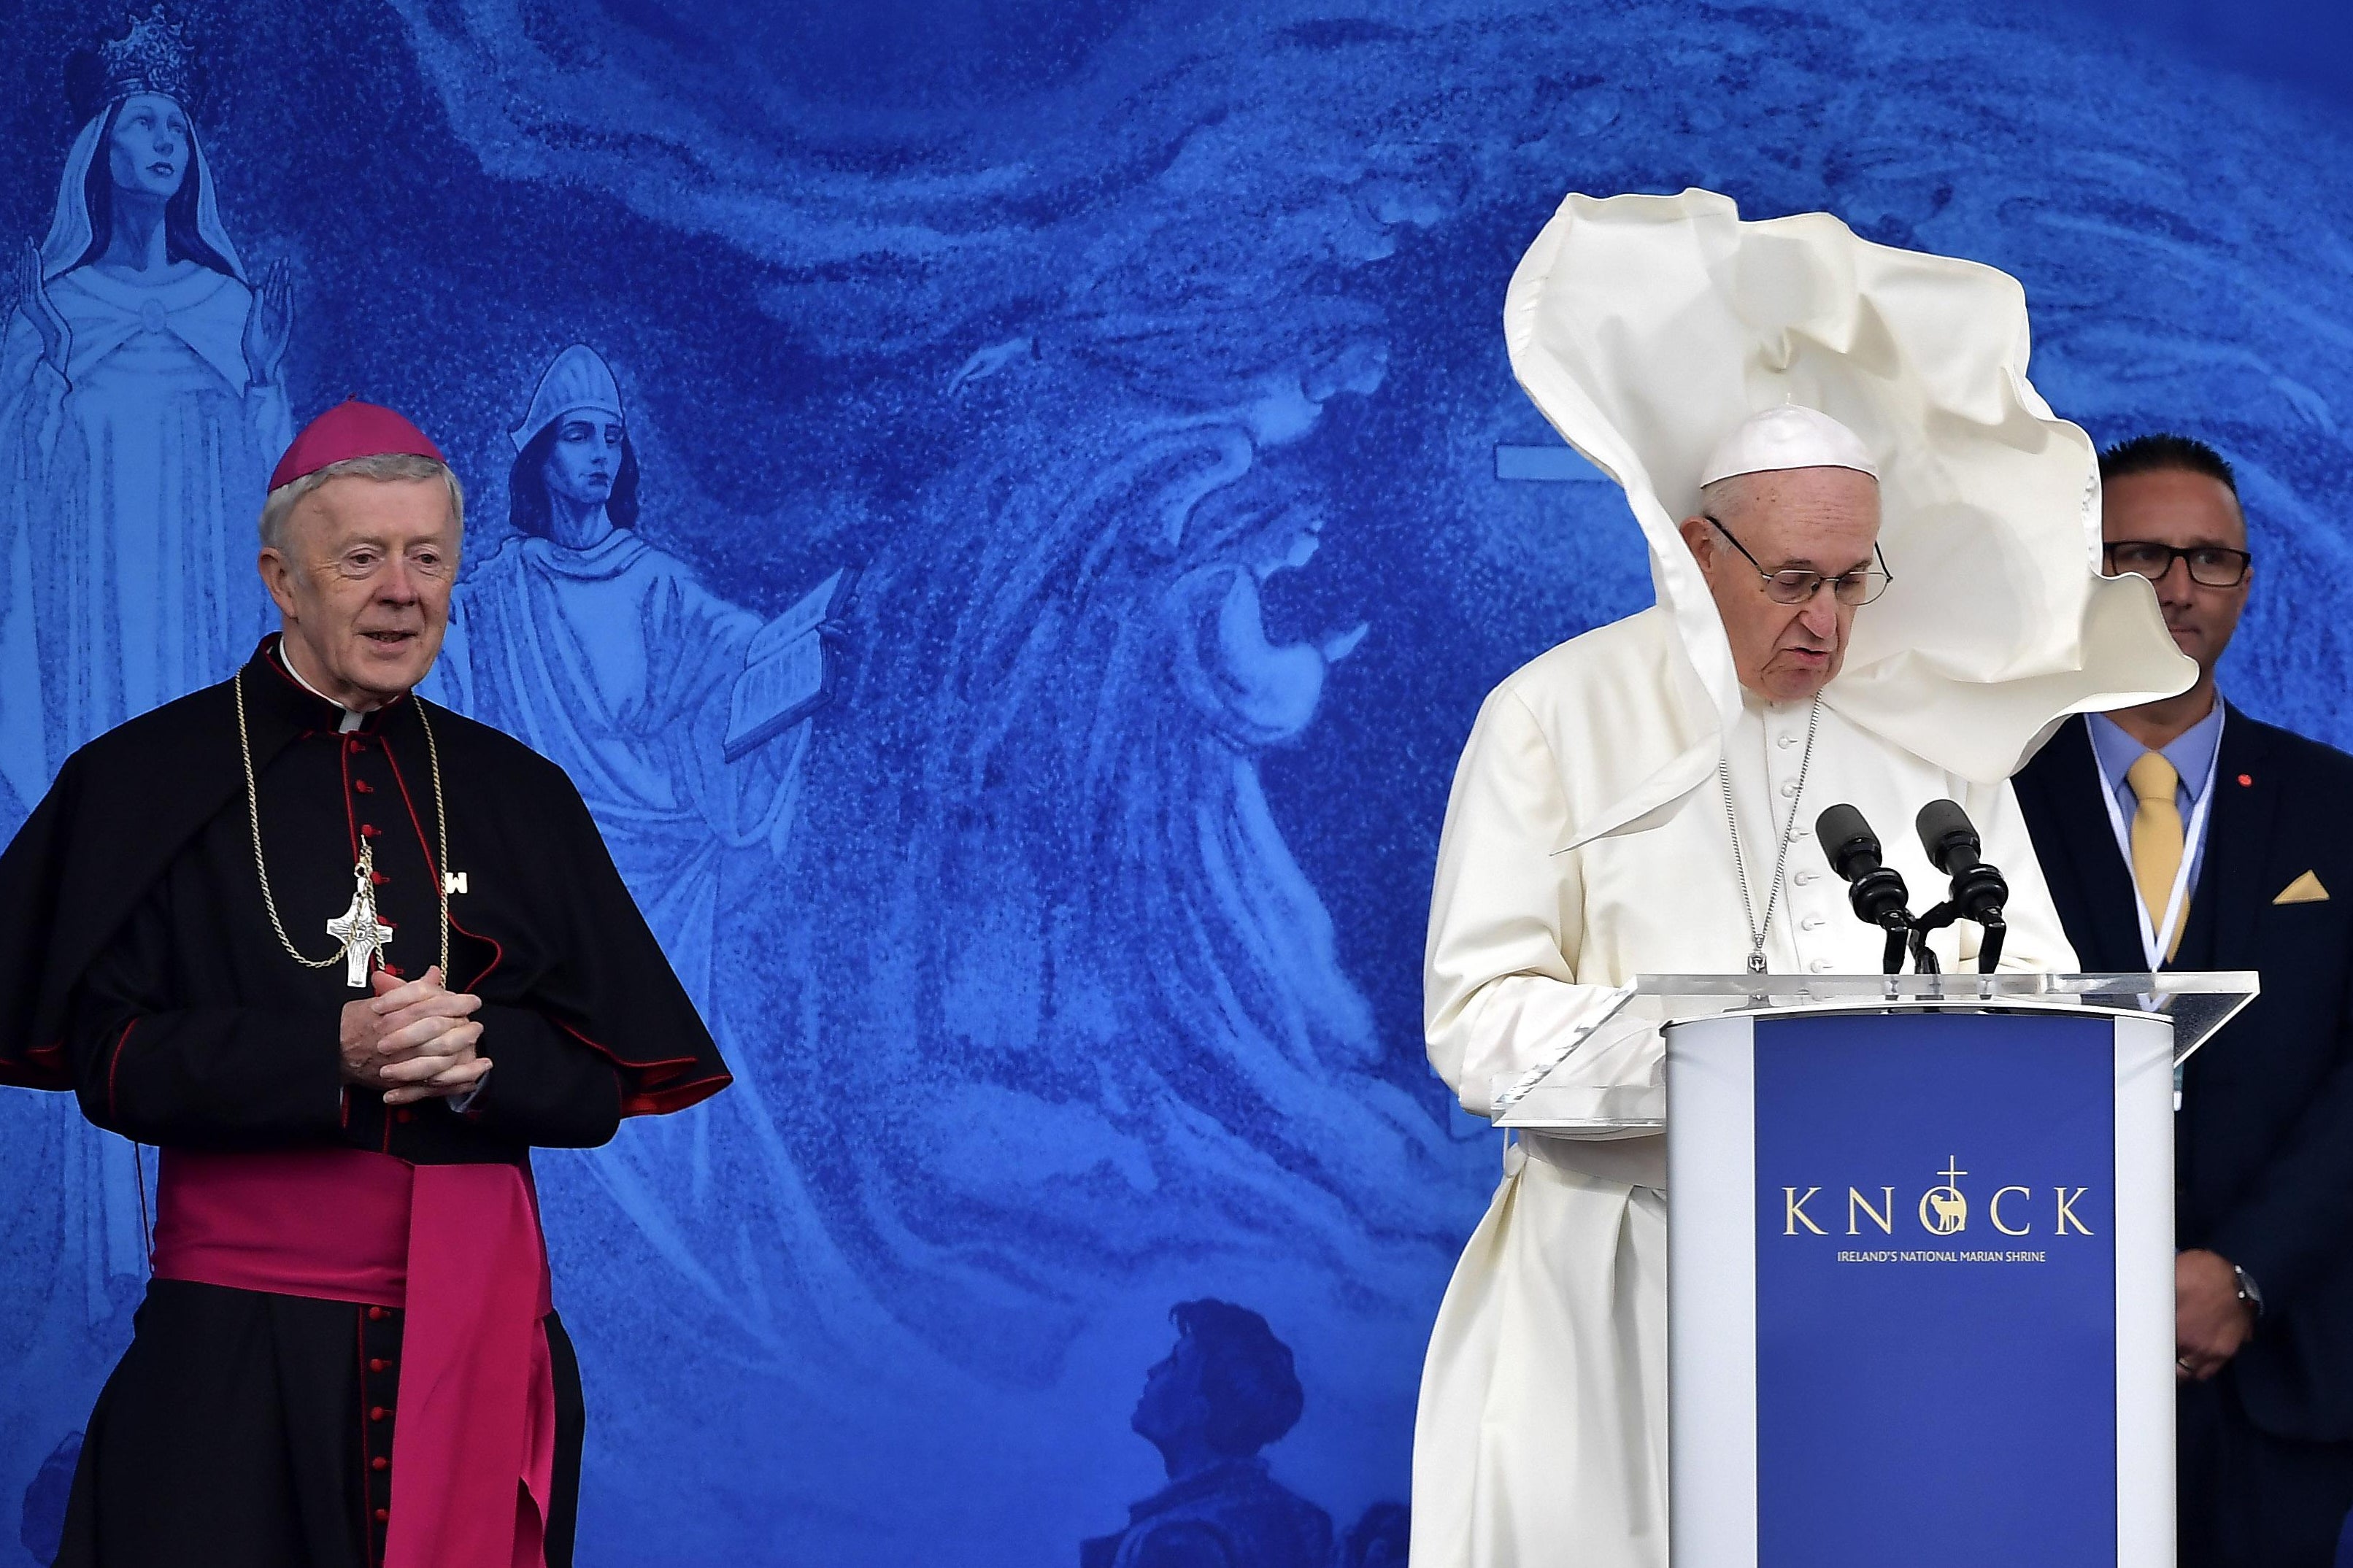 Pope Francis' cape blows straight up in the air as he speaks at a podium.